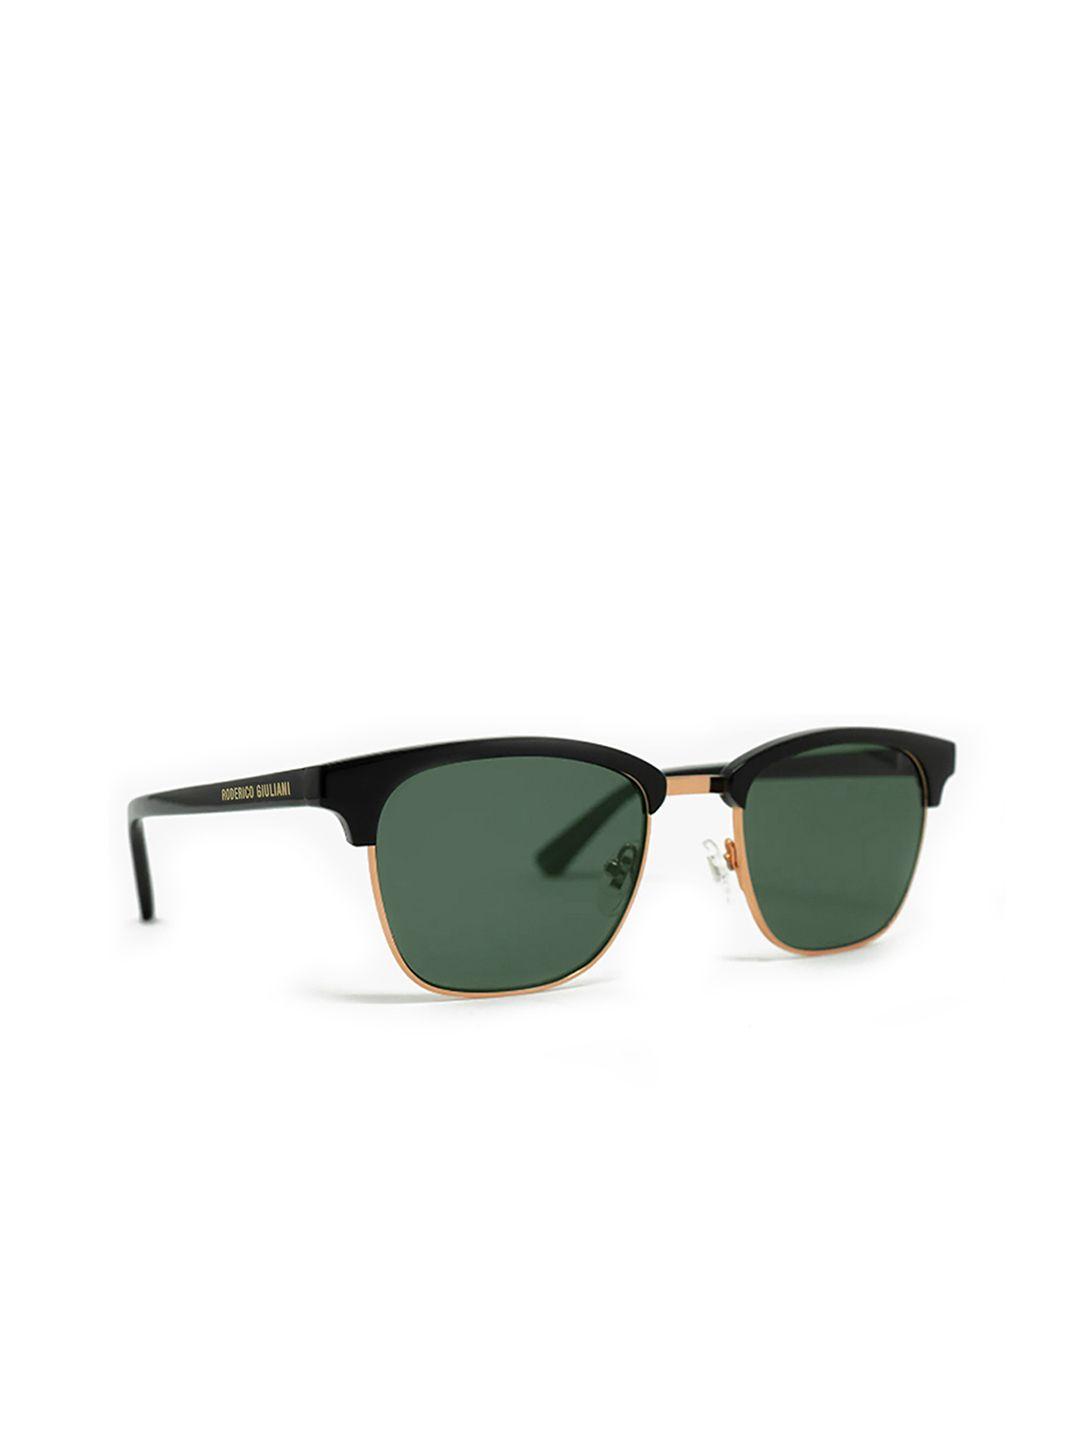 roderico giuliani browline sunglasses with polarised and uv protected lens